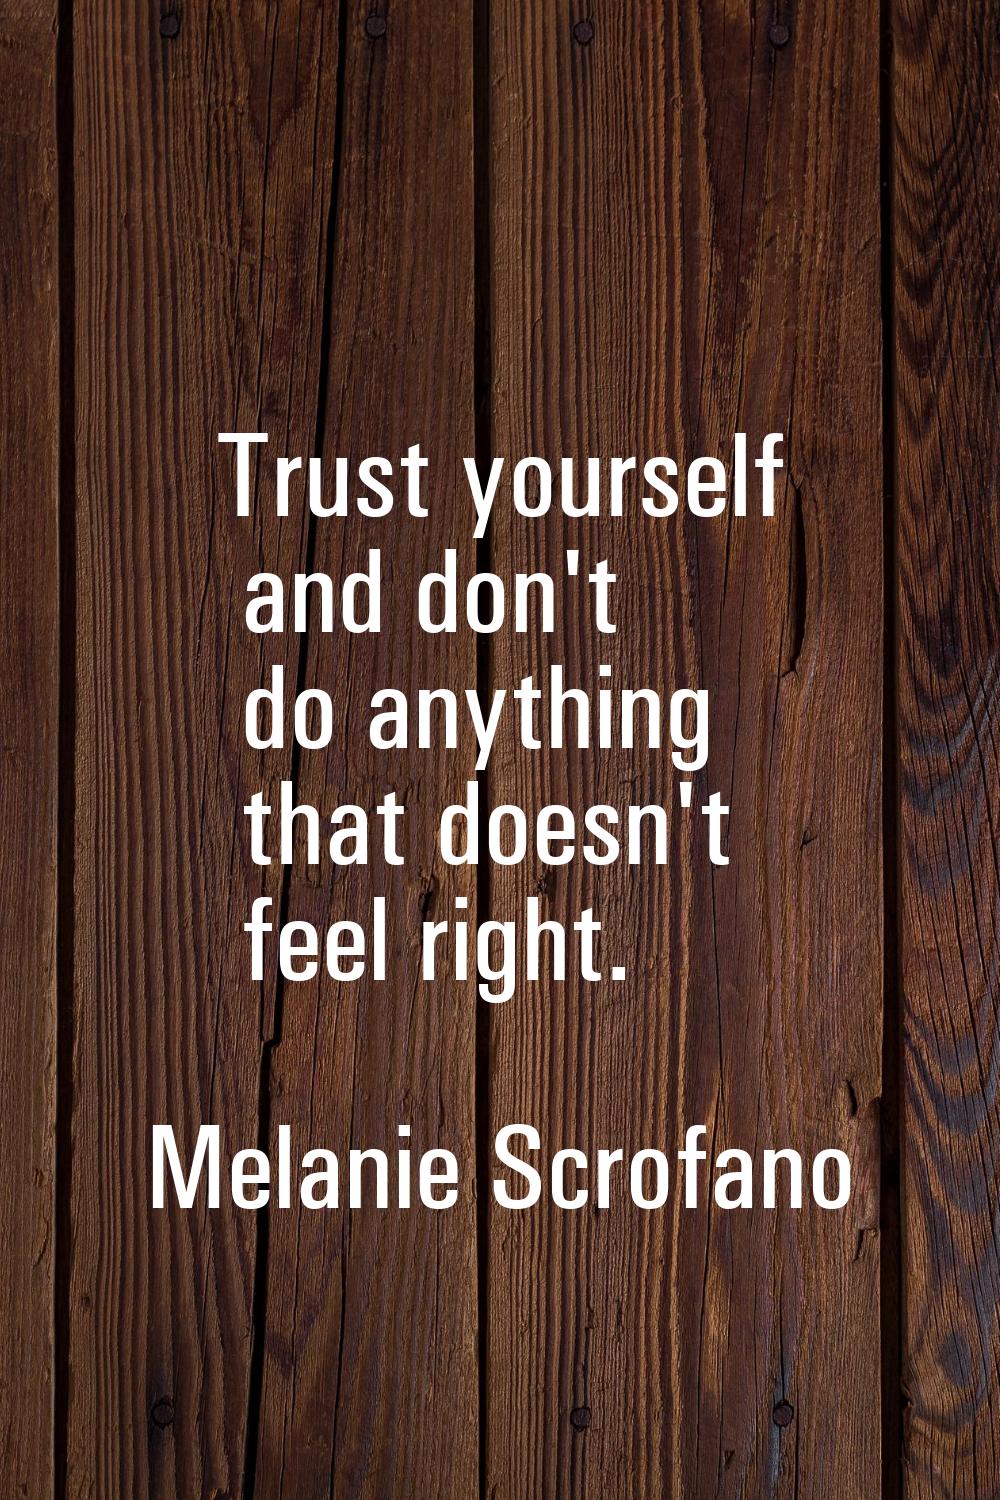 Trust yourself and don't do anything that doesn't feel right.